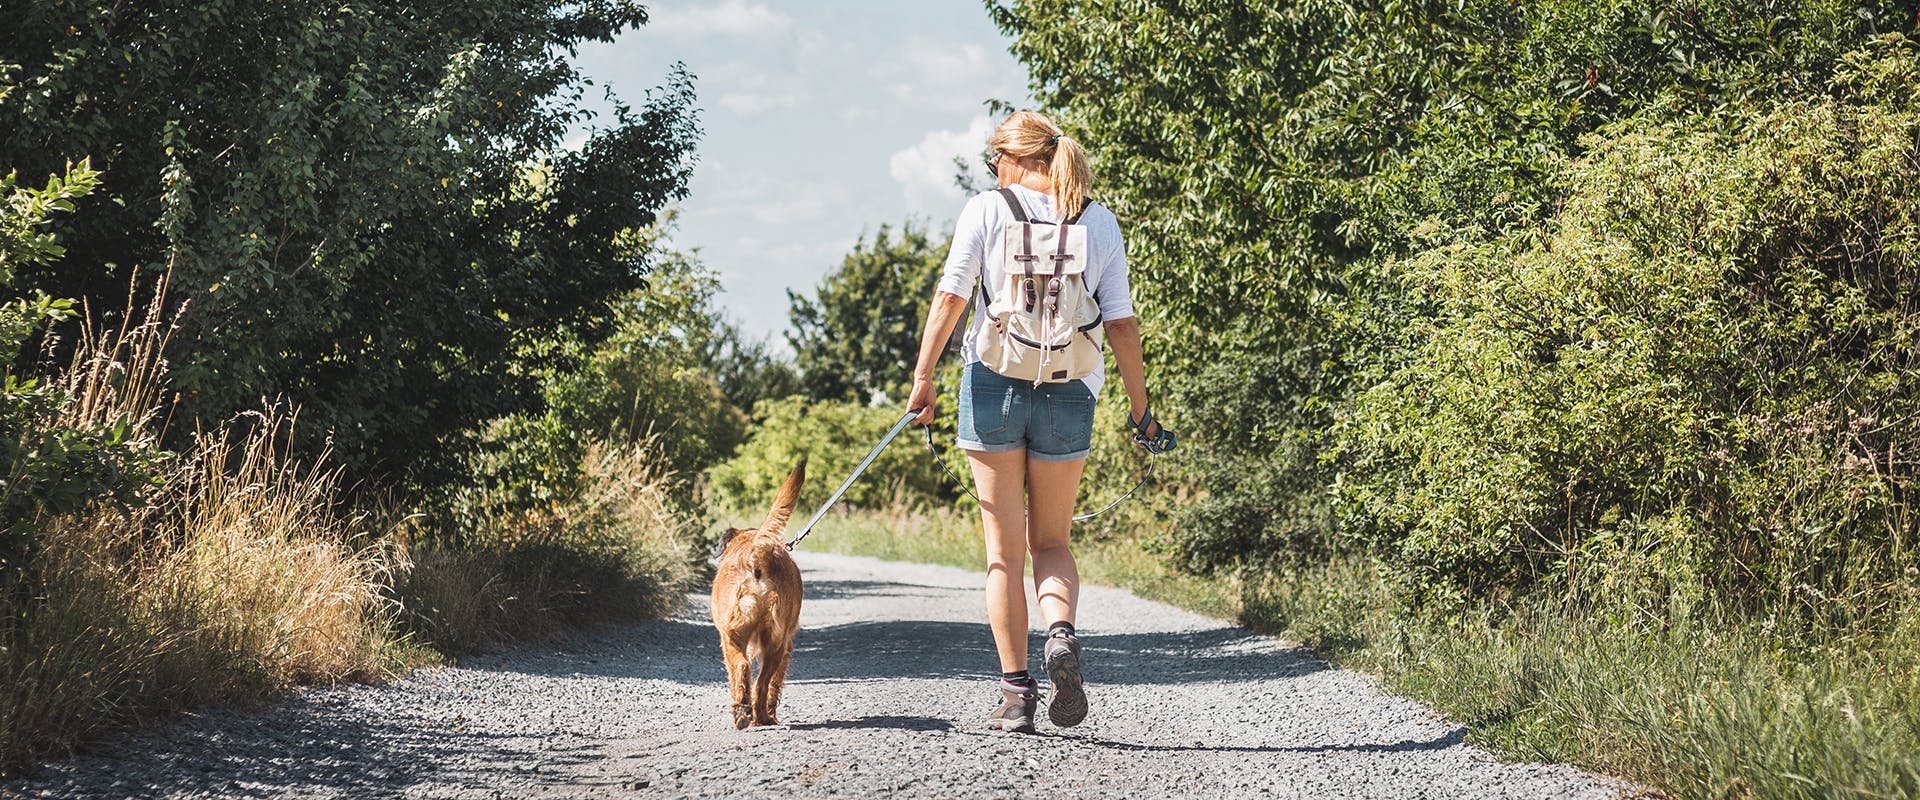 A woman walking her dog in the countryside